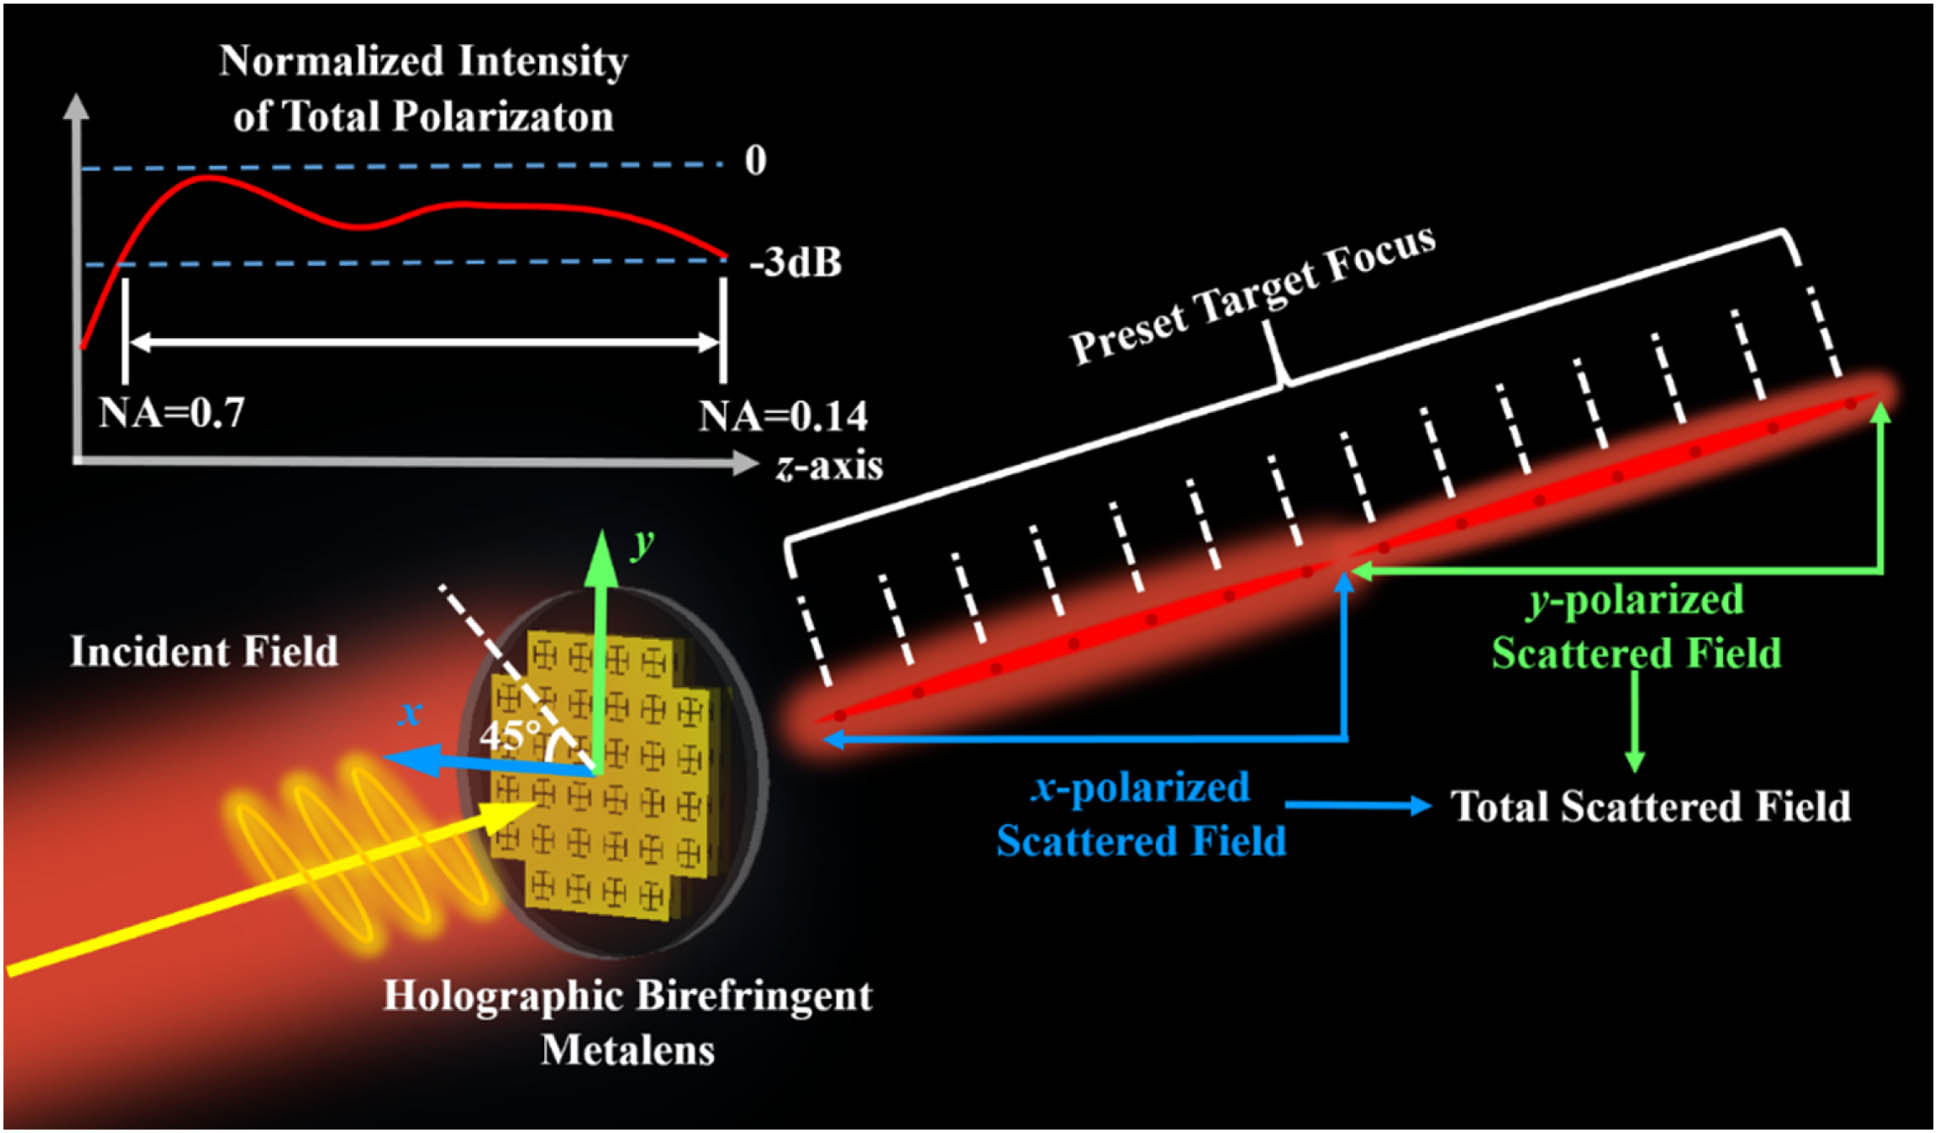 Schematic diagram of proposed birefringent metalens with ultradeep DOF. The incident linearly polarized electromagnetic wave can be decomposed into two orthogonal parts, i.e., the x-polarized (Ex) and y-polarized (Ey) beams. The birefringent metalens is able to modulate Ex or Ey independently. Holography can be applied to set several foci along the z axis (the optical axis of the metalens) for Ex and Ey beams to realize ultradeep DOF.